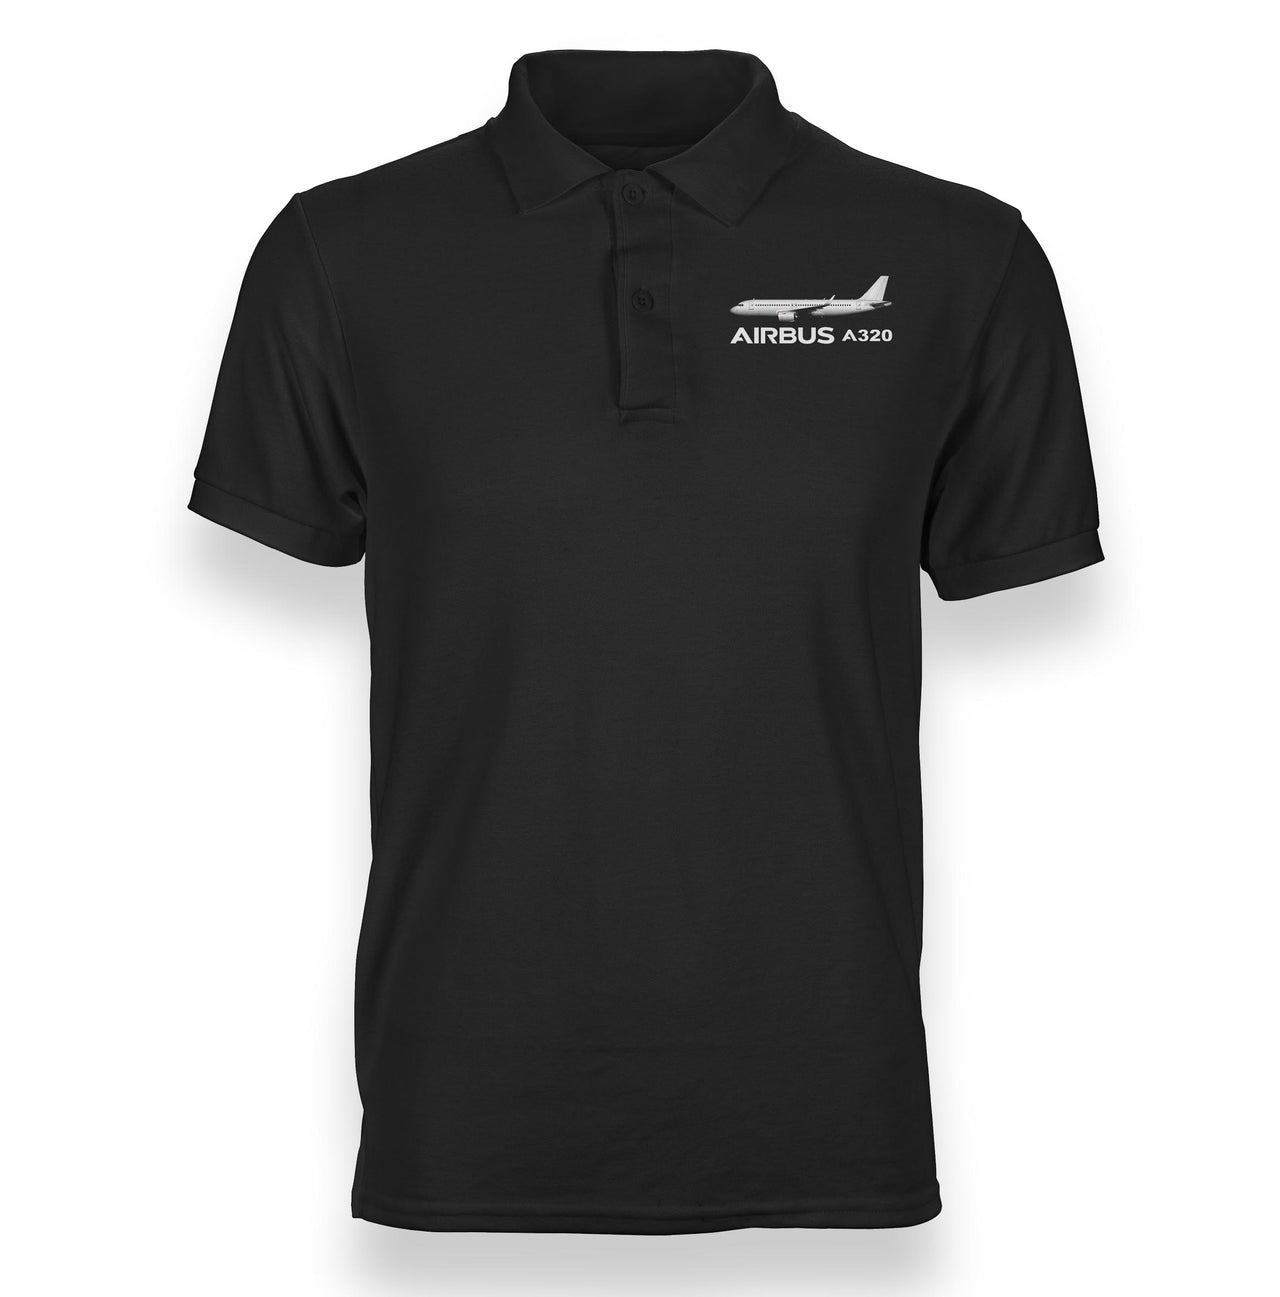 The Airbus A320 Designed Polo T-Shirts